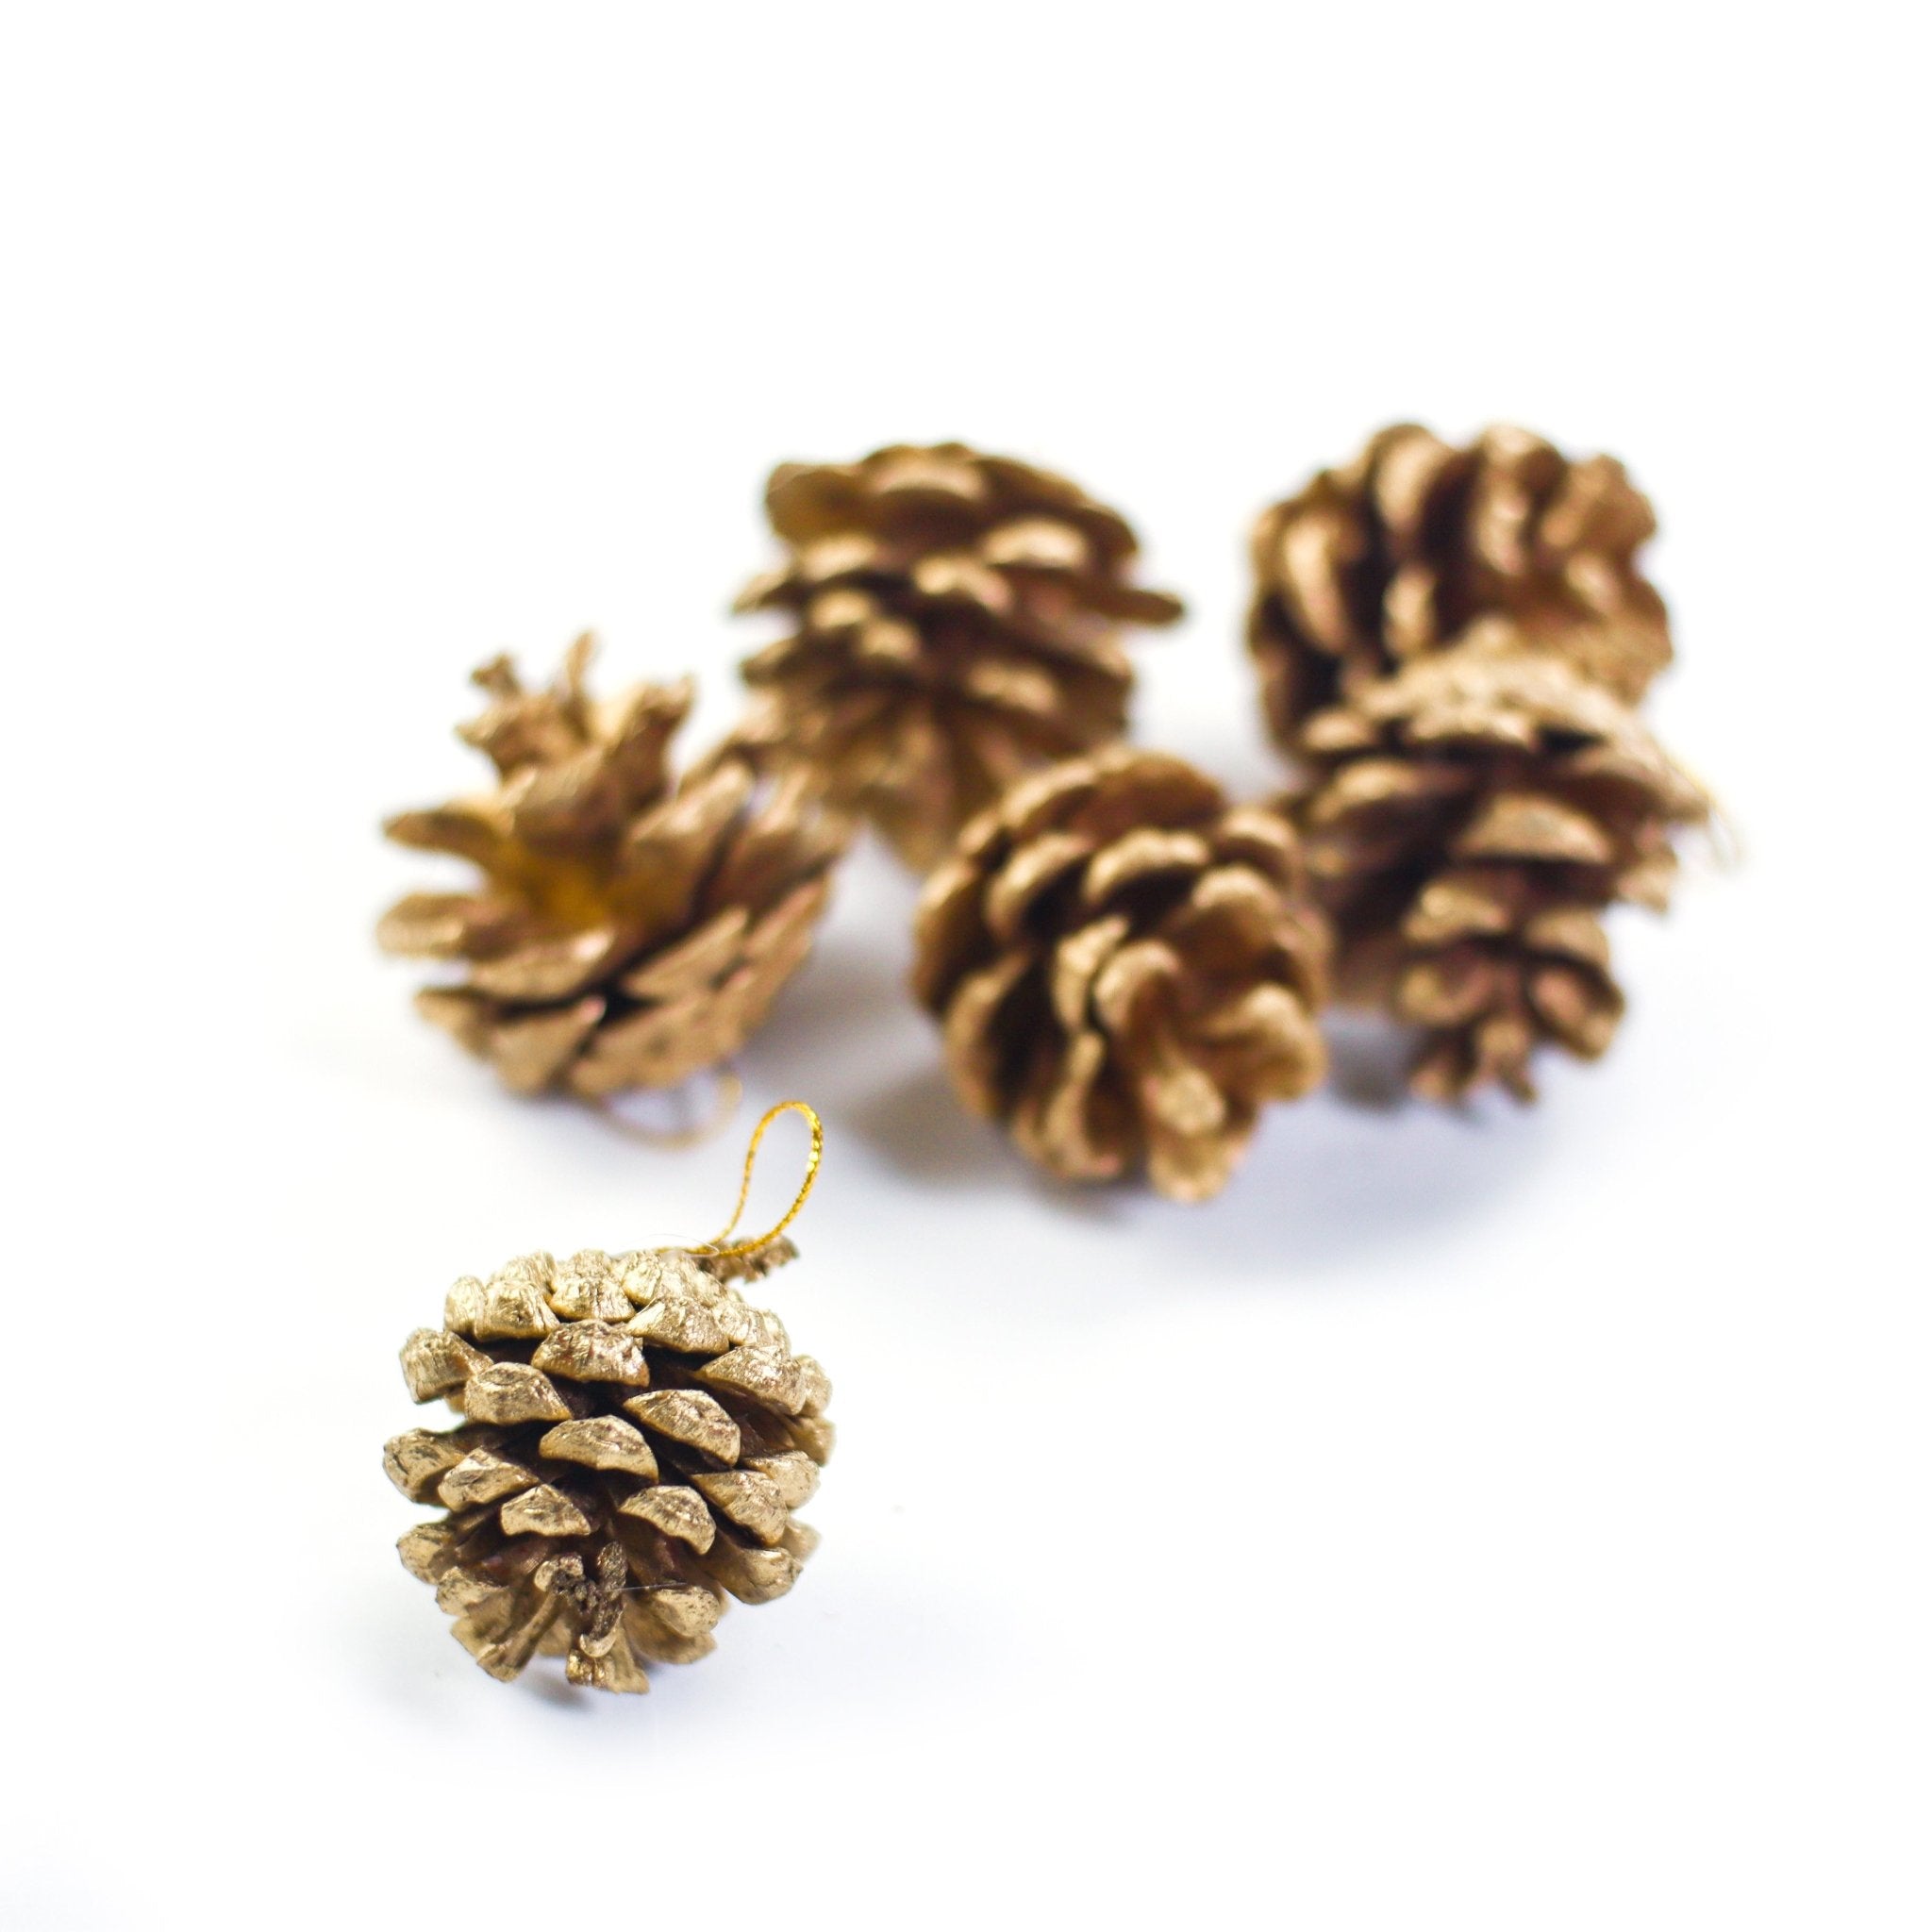 Gold Painted Pine Cones with hanging string 6pcs - MODA FLORA Santa's Workshop